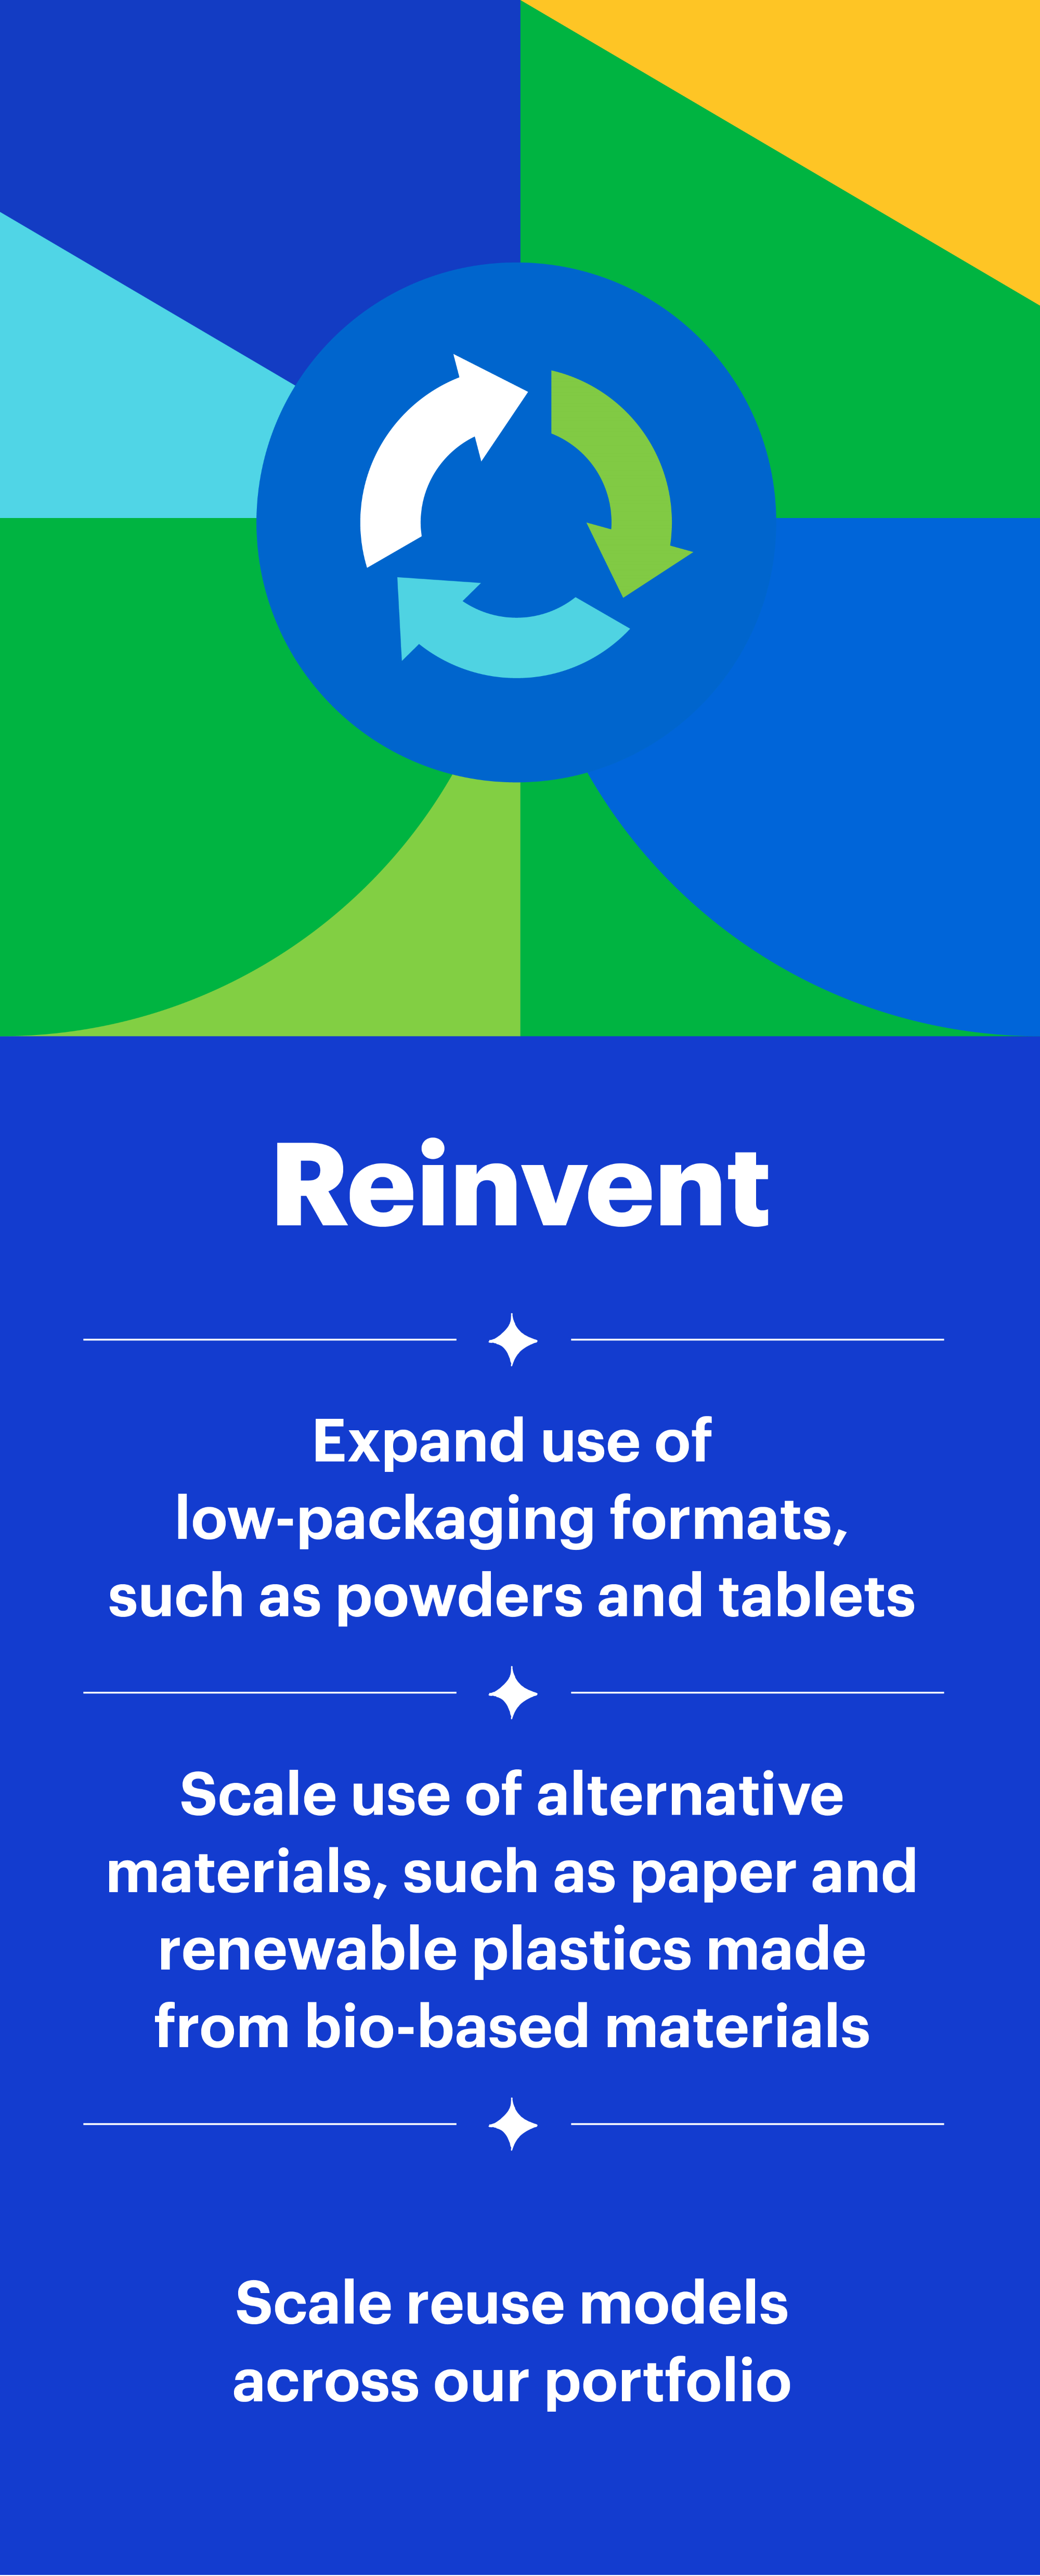 Reinvent: Expand use of low-packaging formats, such as powders and tablets. Scale use of alternative materials, such as paper and renewable plastics made from bio-based materials. Scale reuse models across our portfolio.